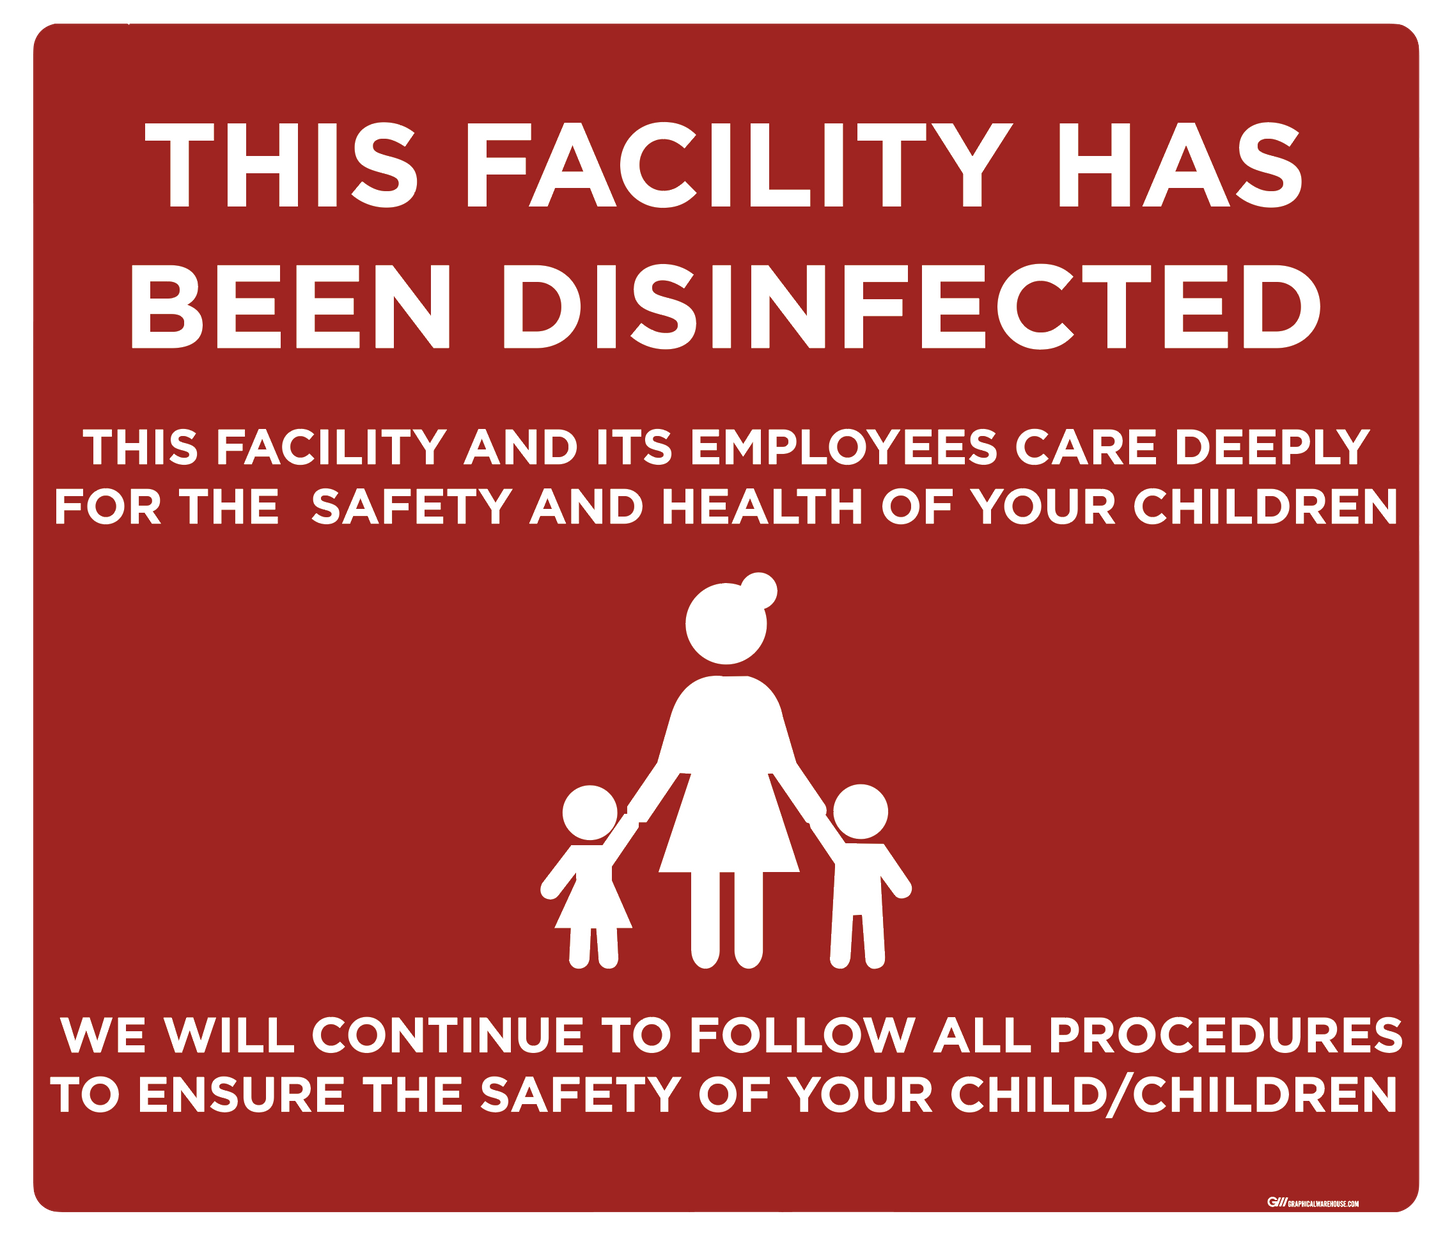 "Daycare Disinfected Version 2" Adhesive Durable Vinyl Decal- Various Sizes/Colors Available